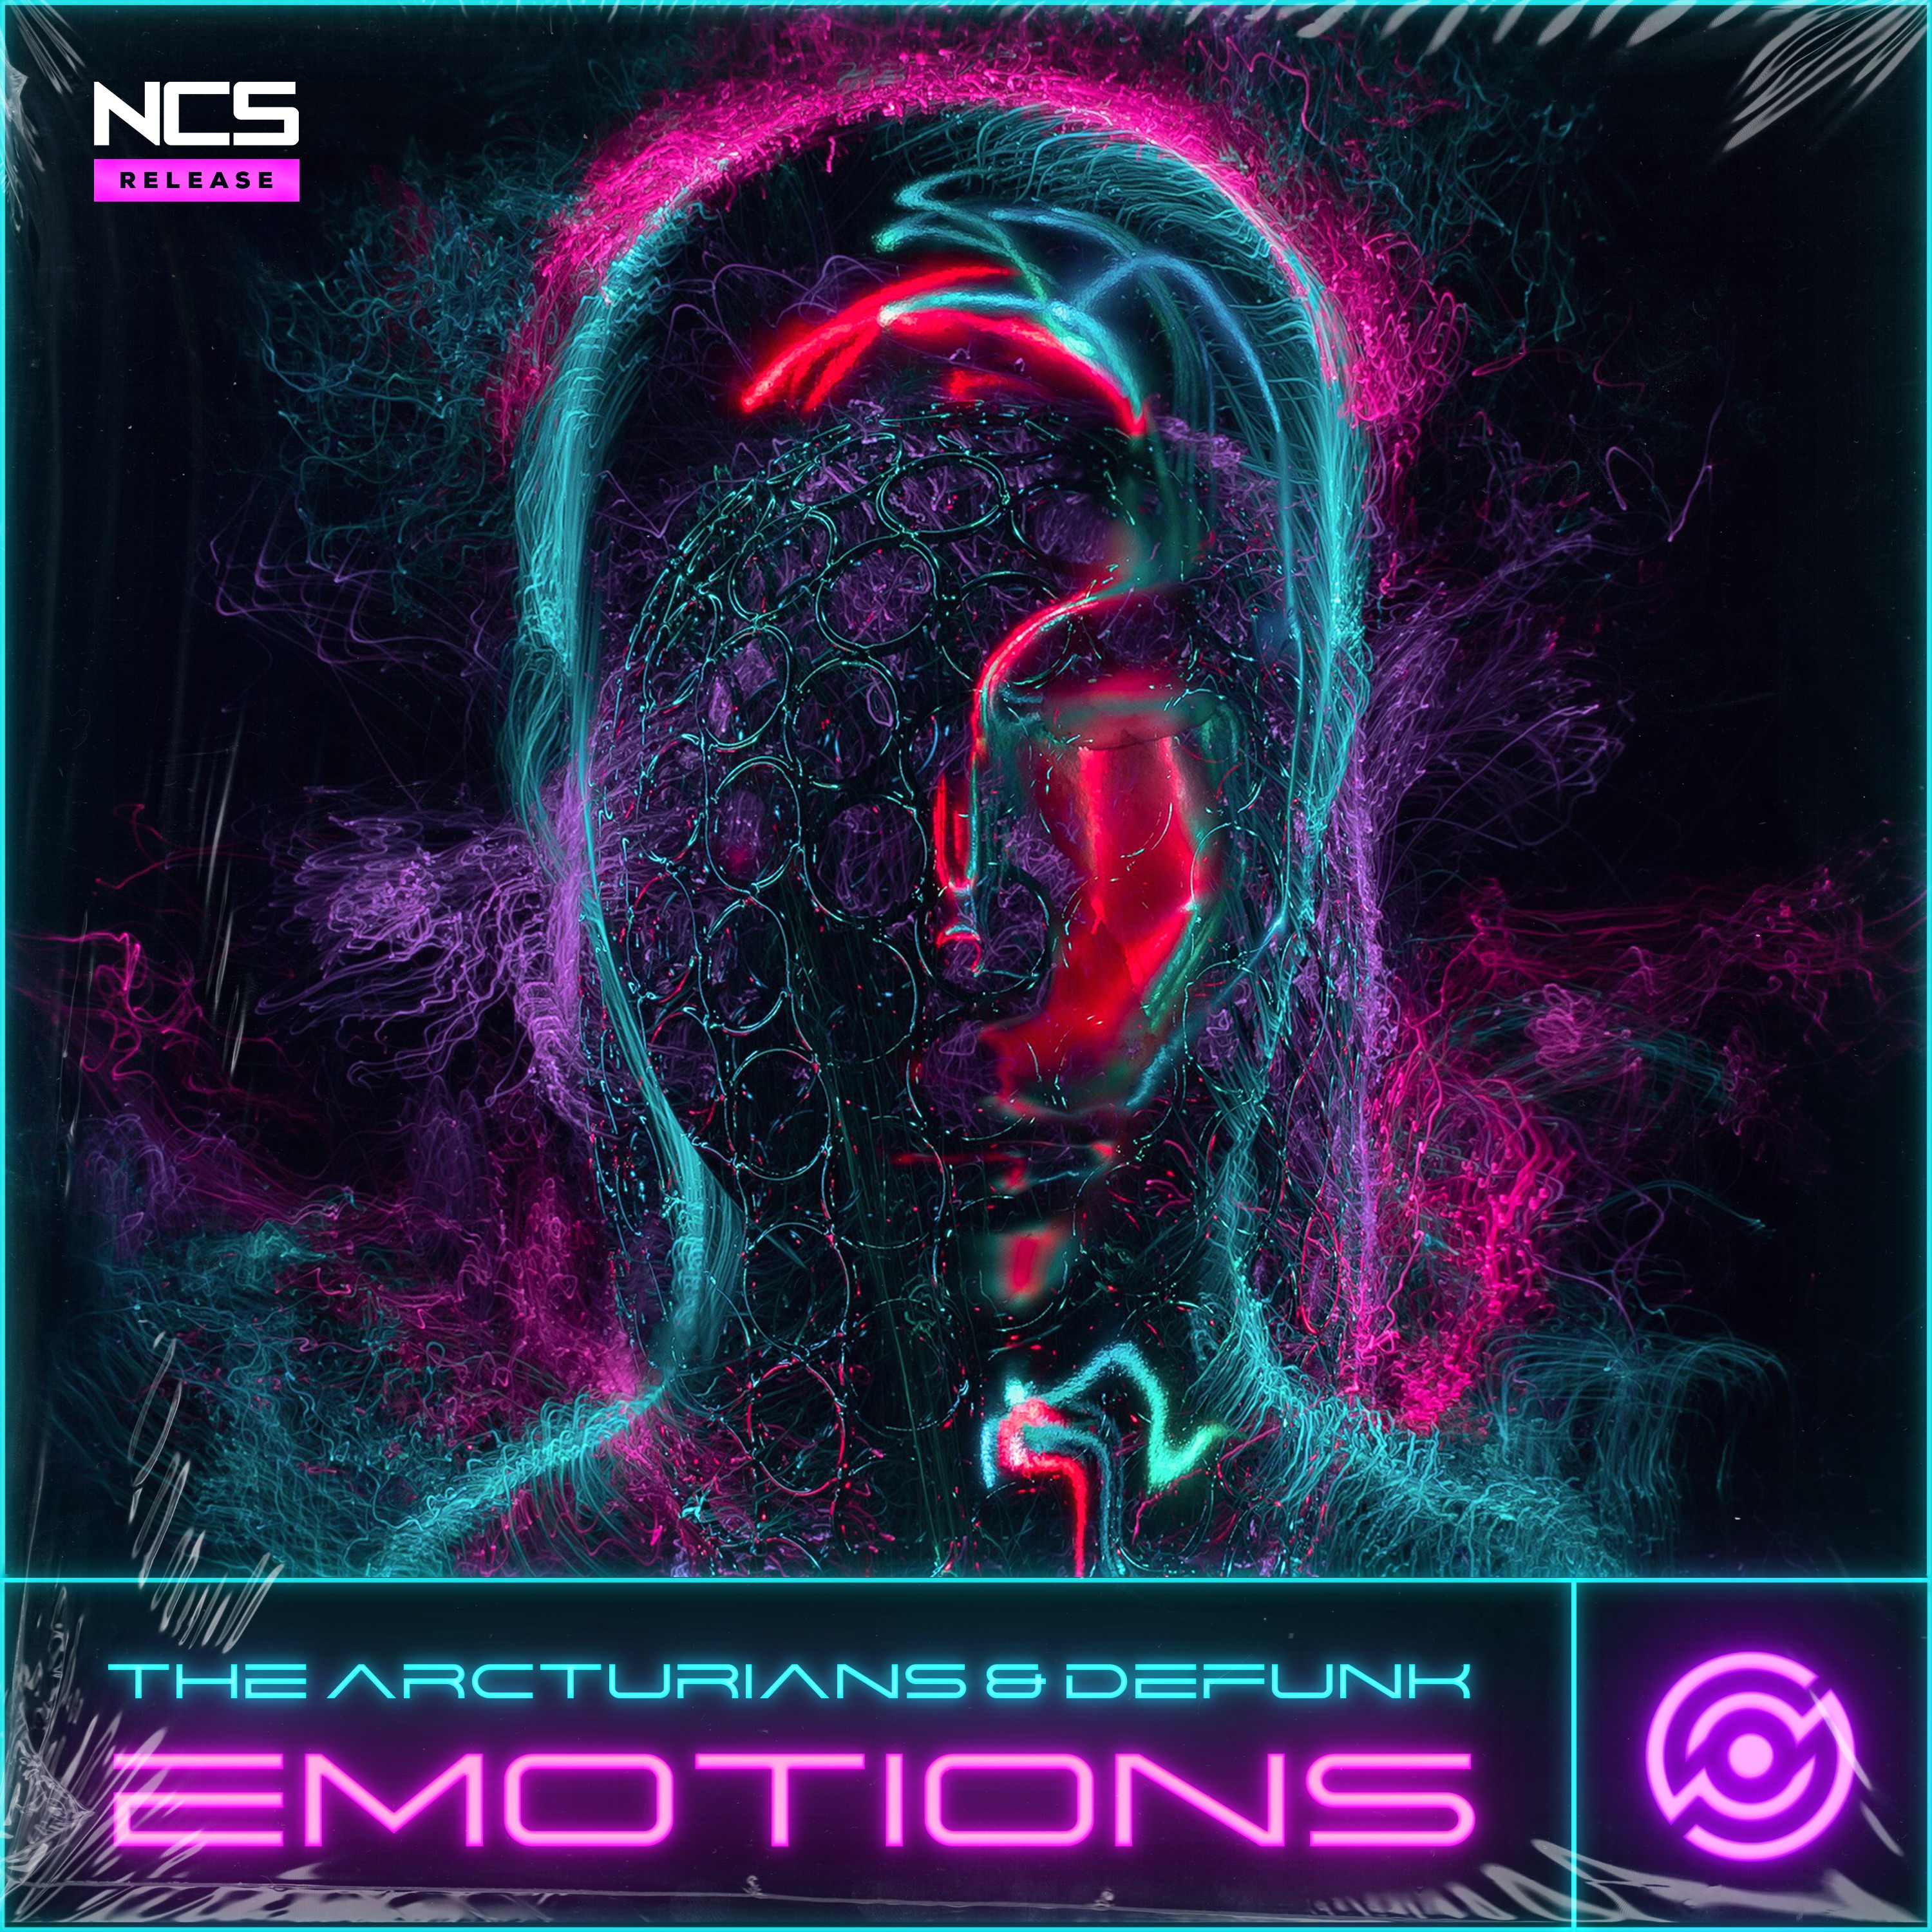 The Arcturians & Defunk - Emotions [NCS Release]